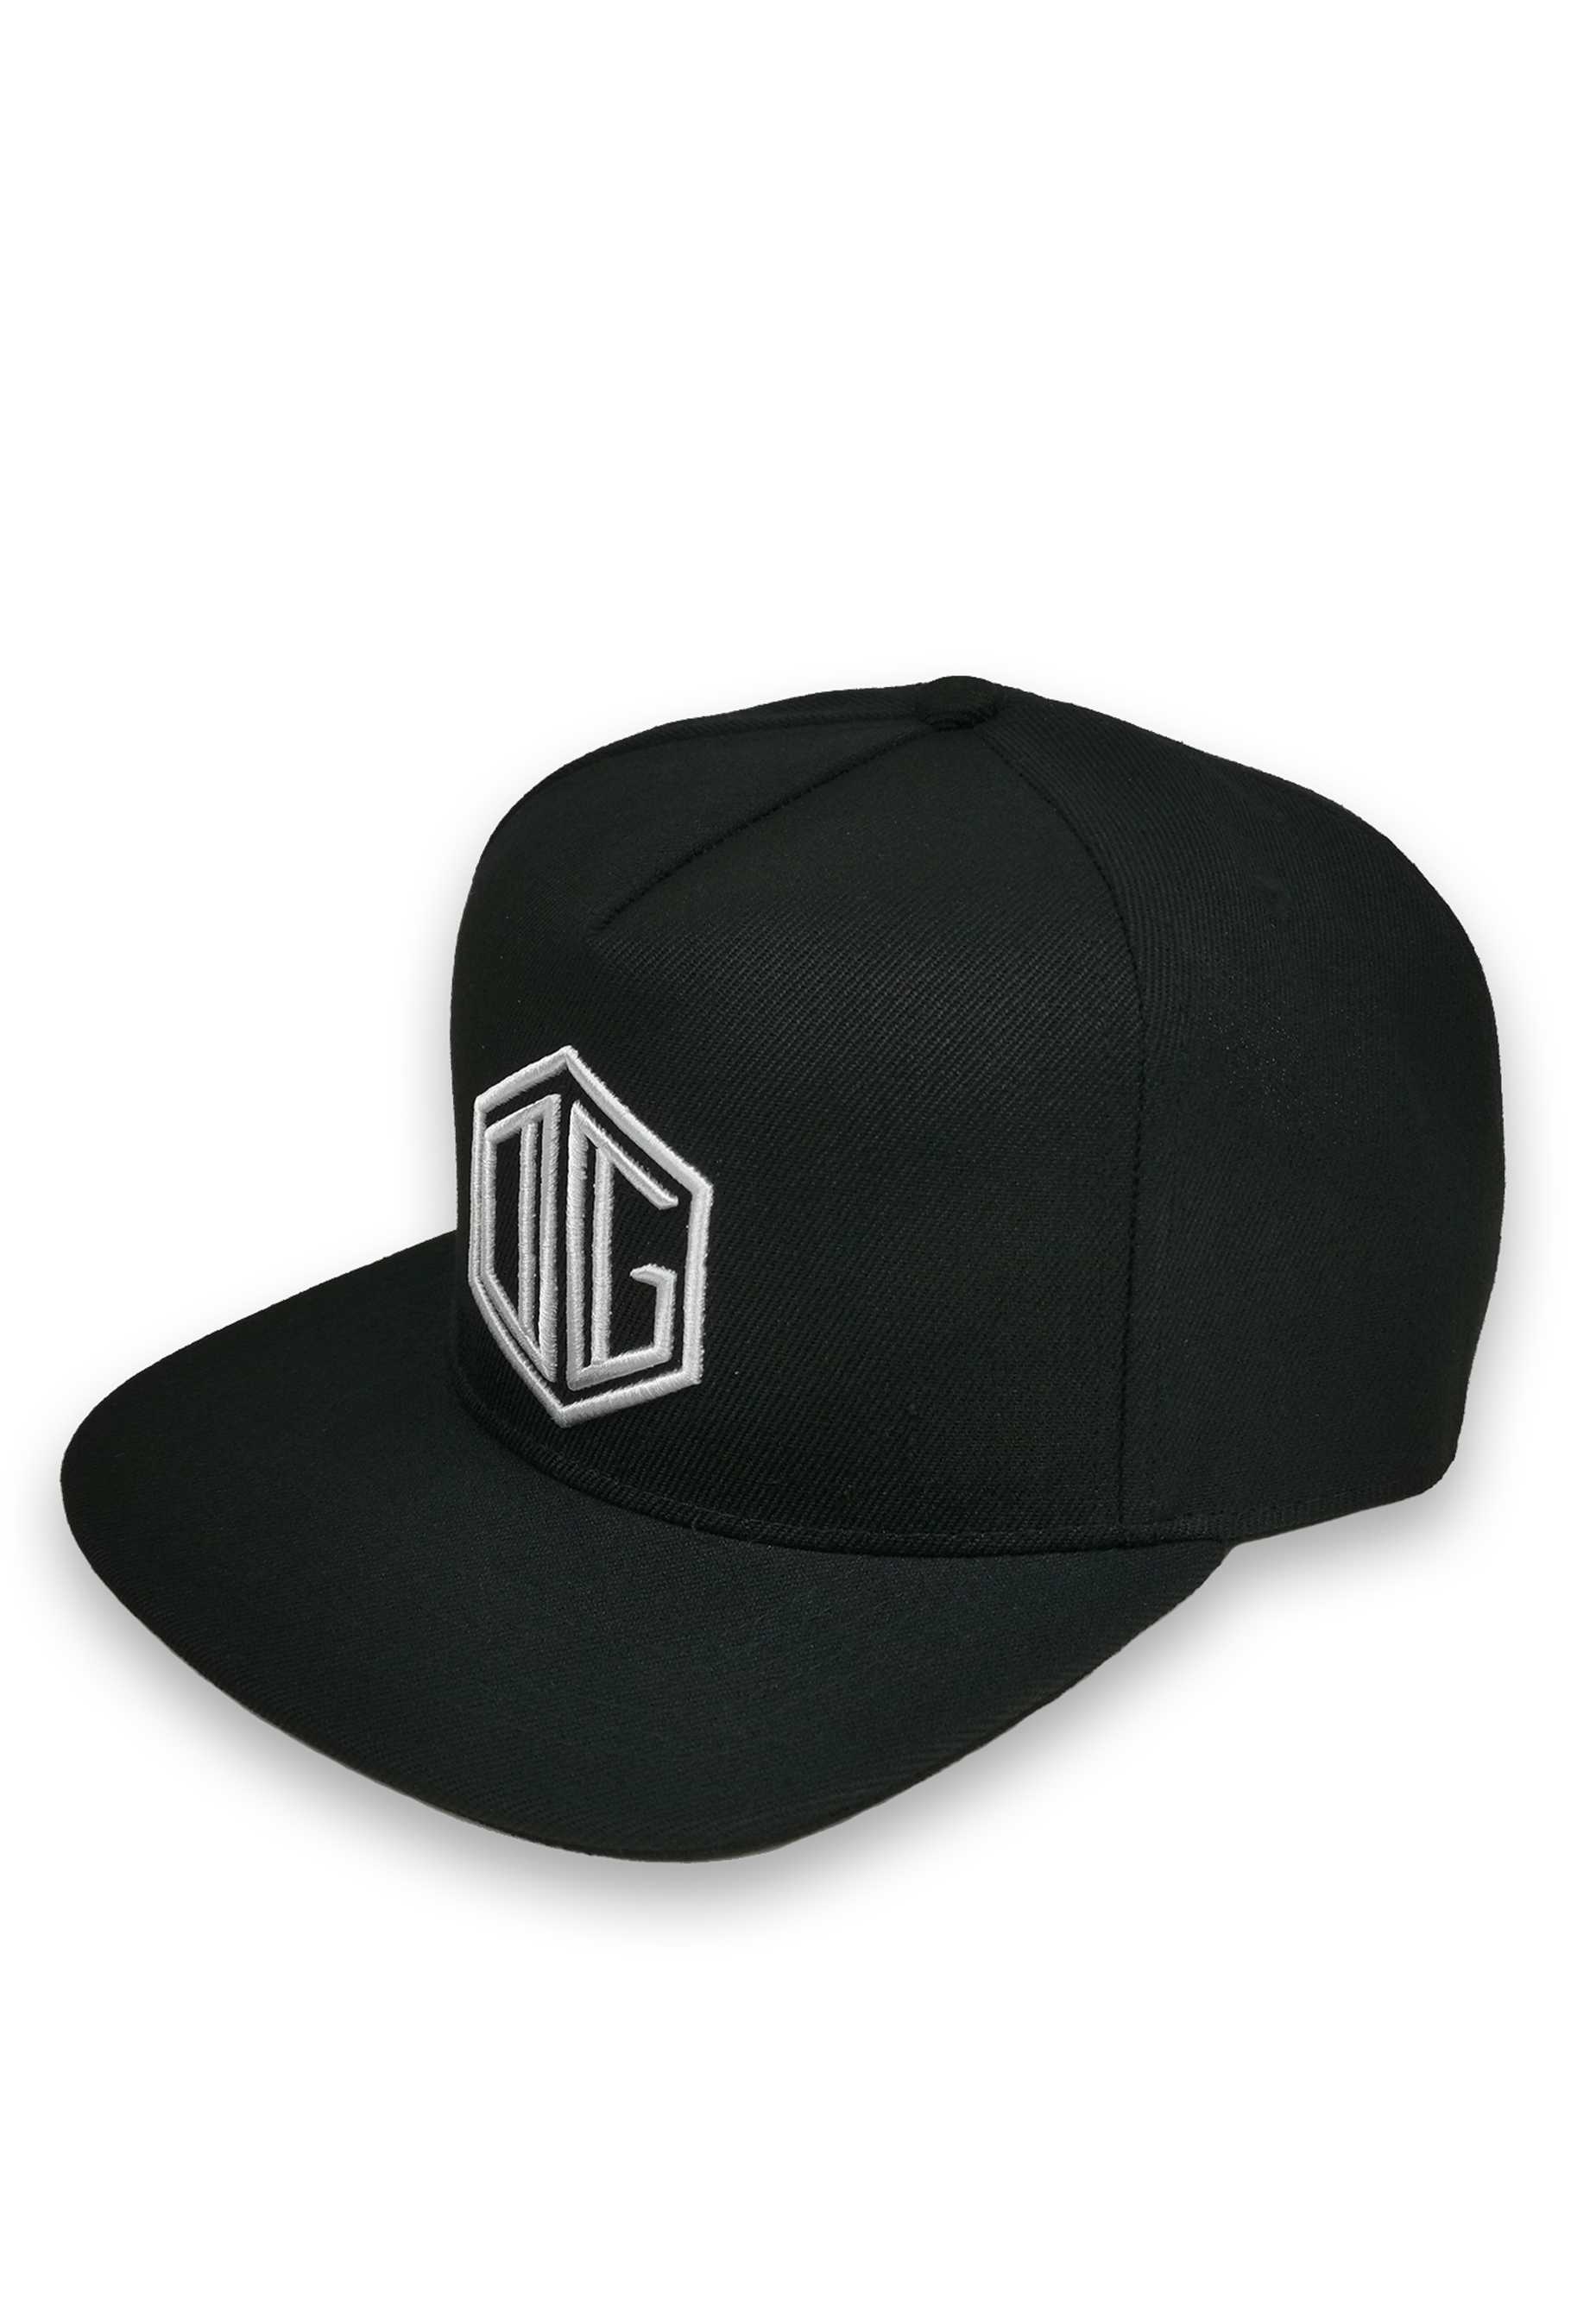 black and white embroidery snapback hat